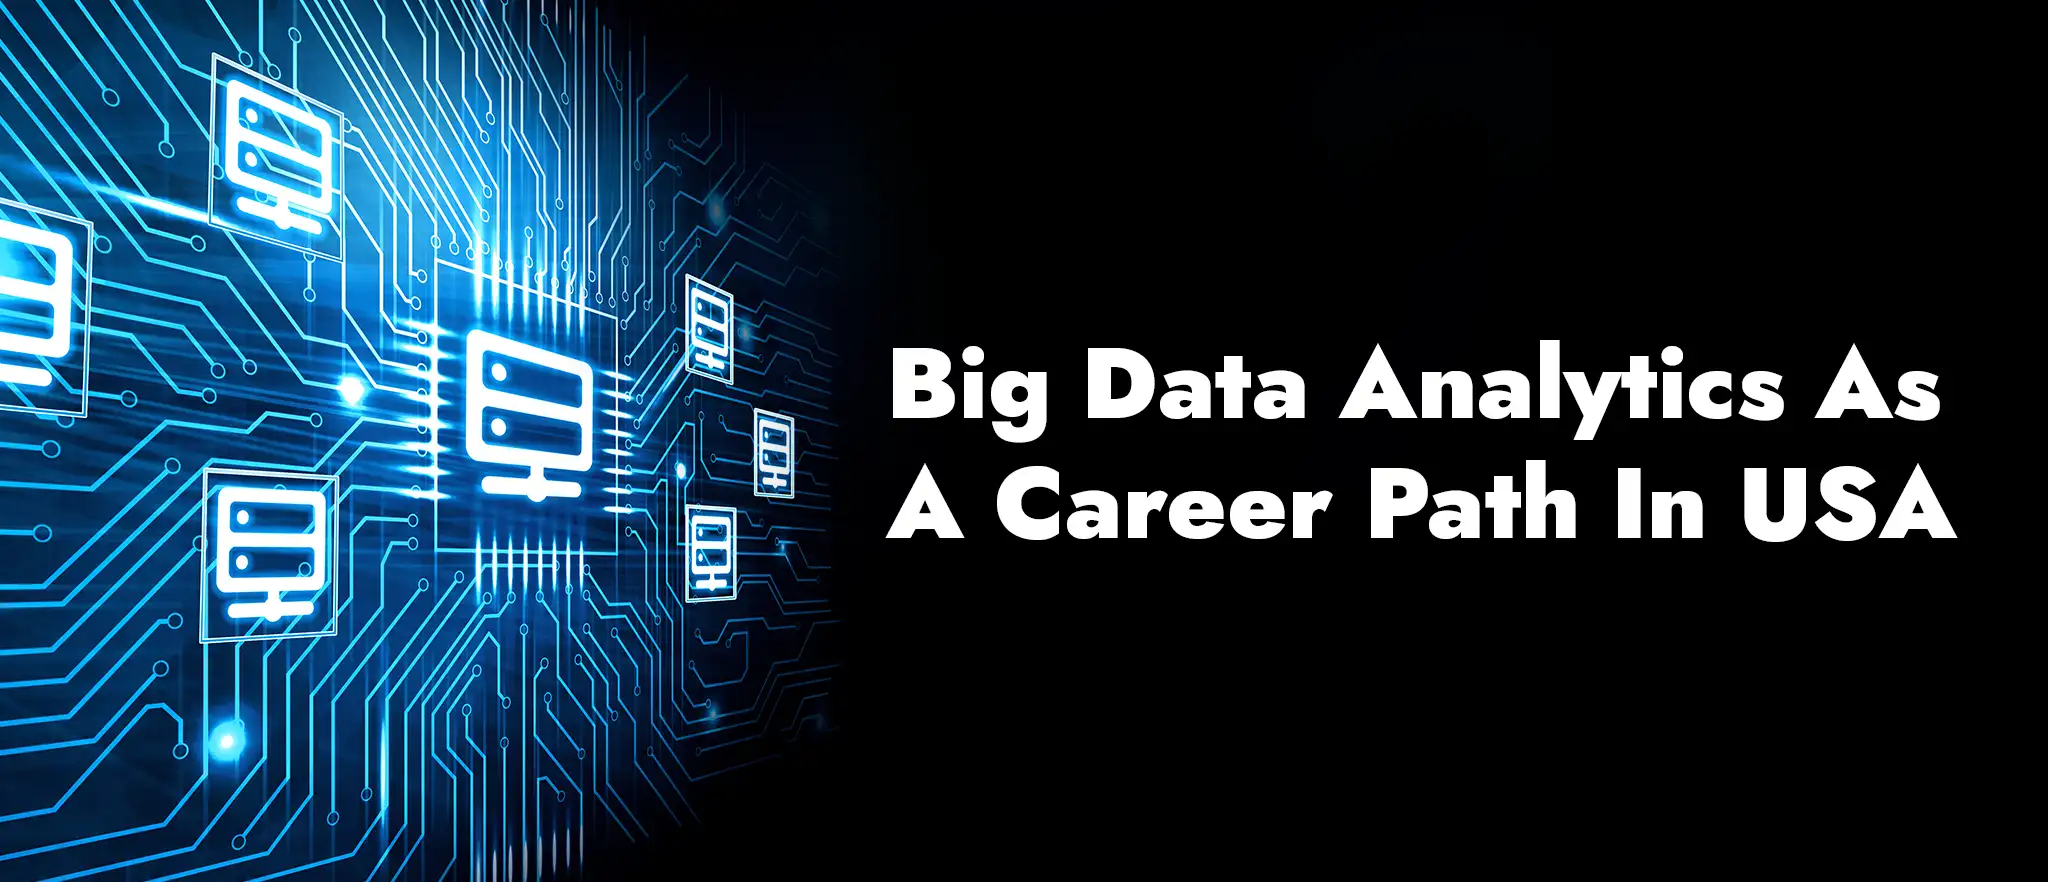 Big Data Analytics As A Career Path In the USA